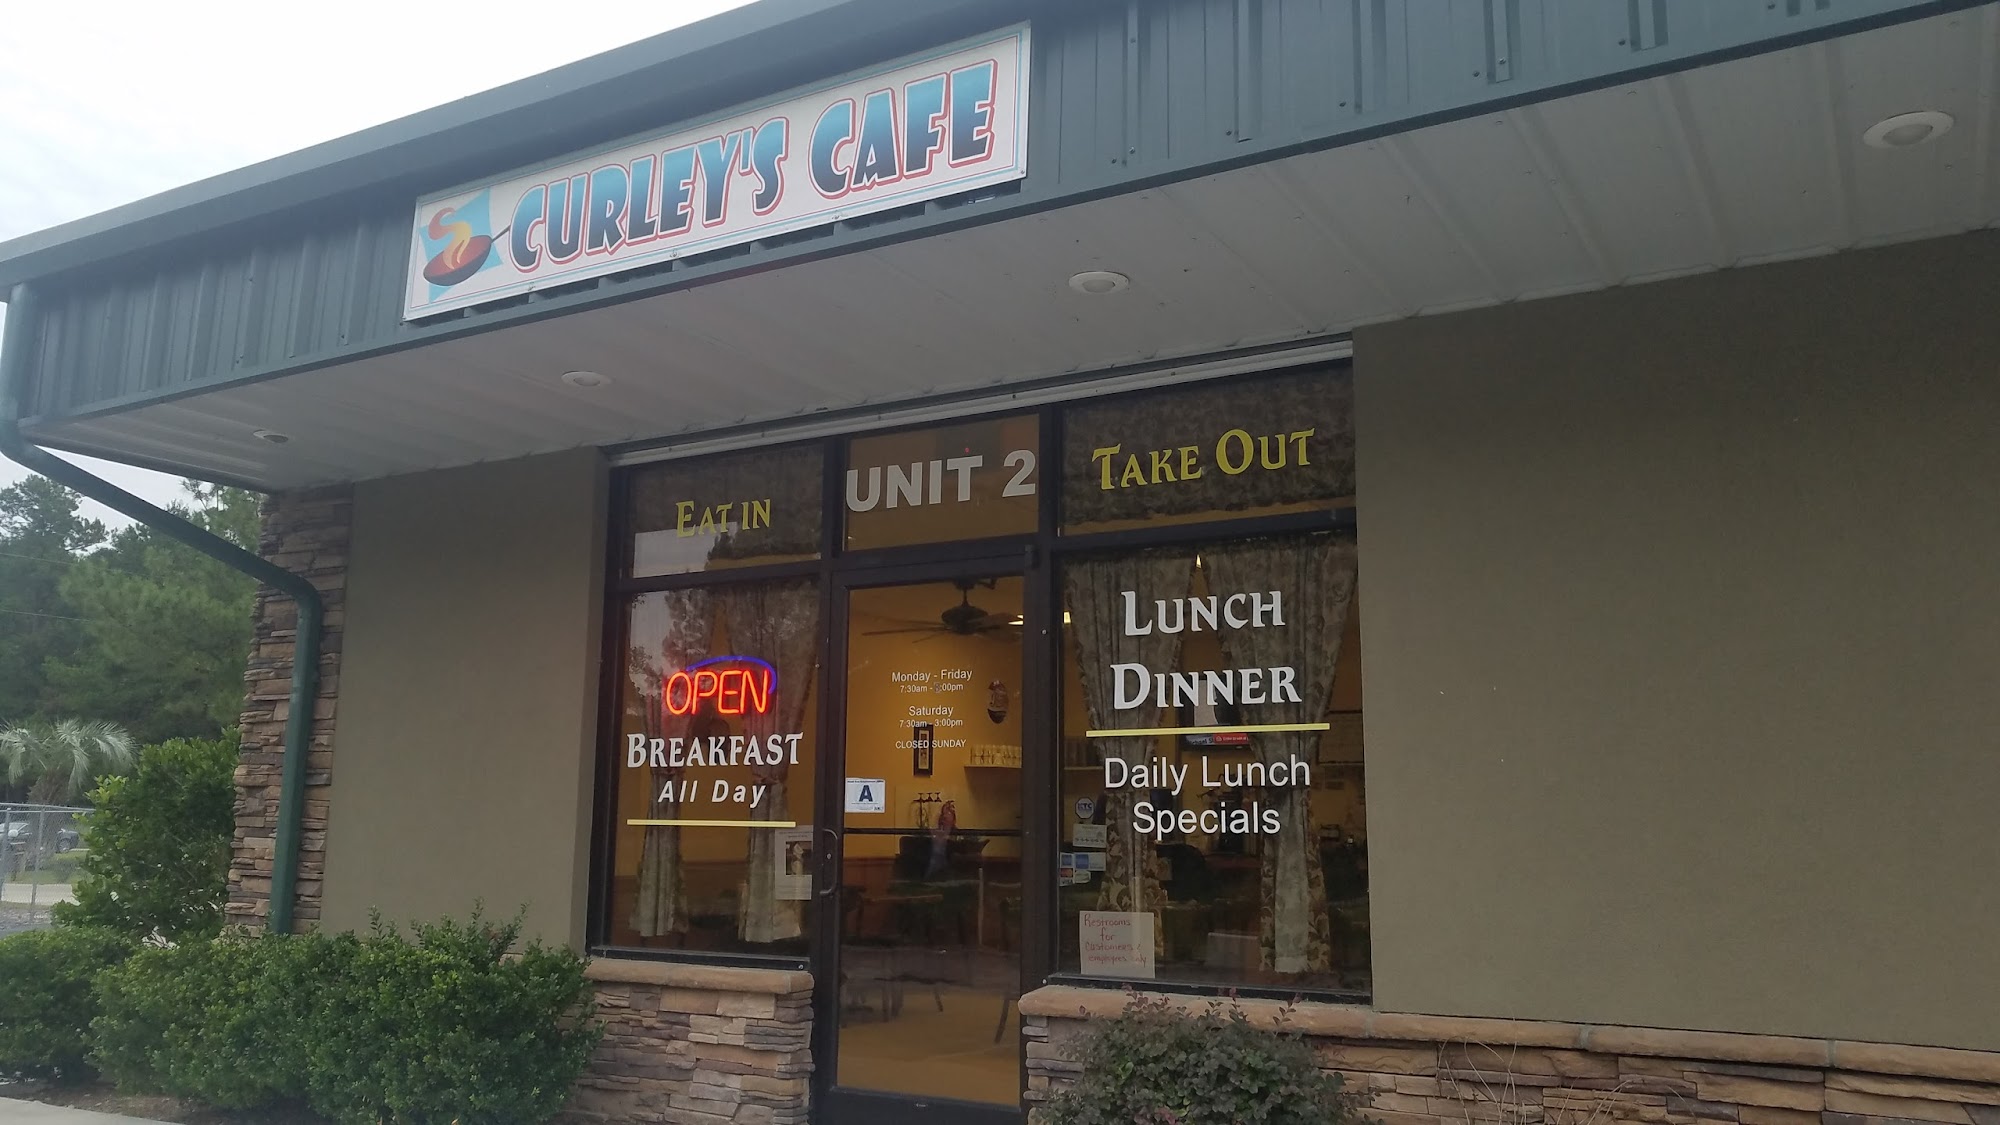 Curley's Cafe